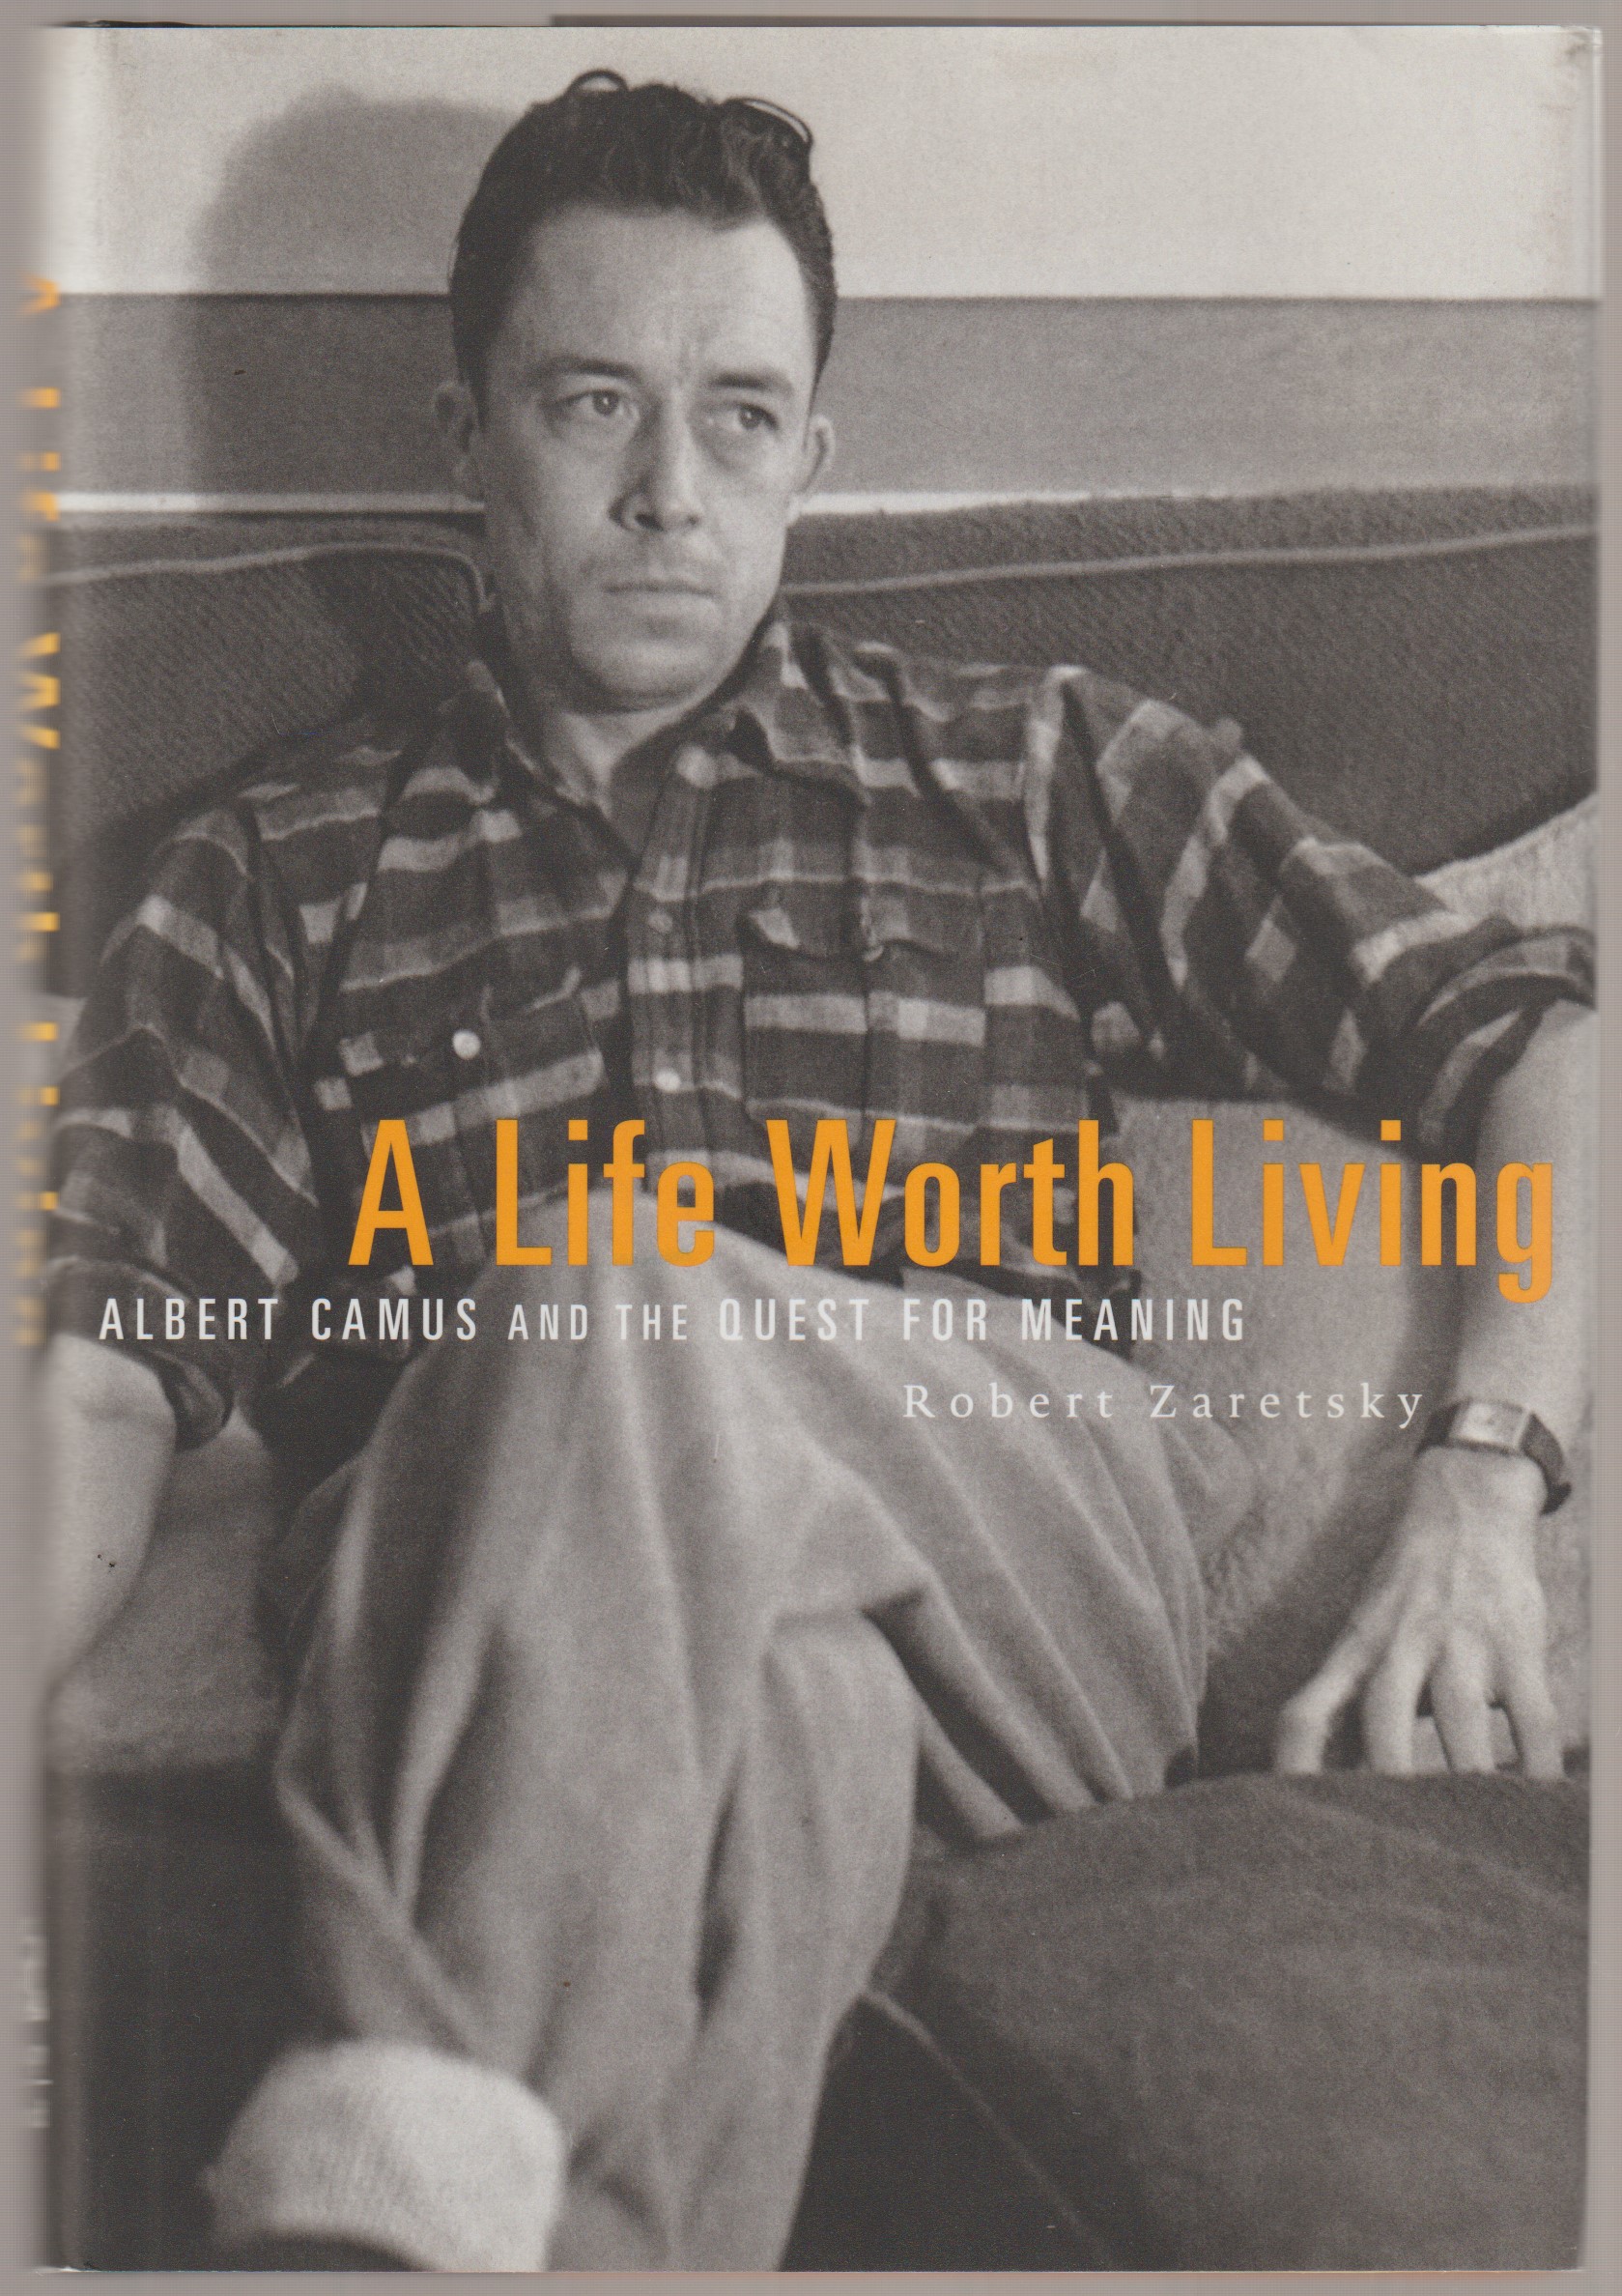 A life worth living : Albert Camus and the quest for meaning.